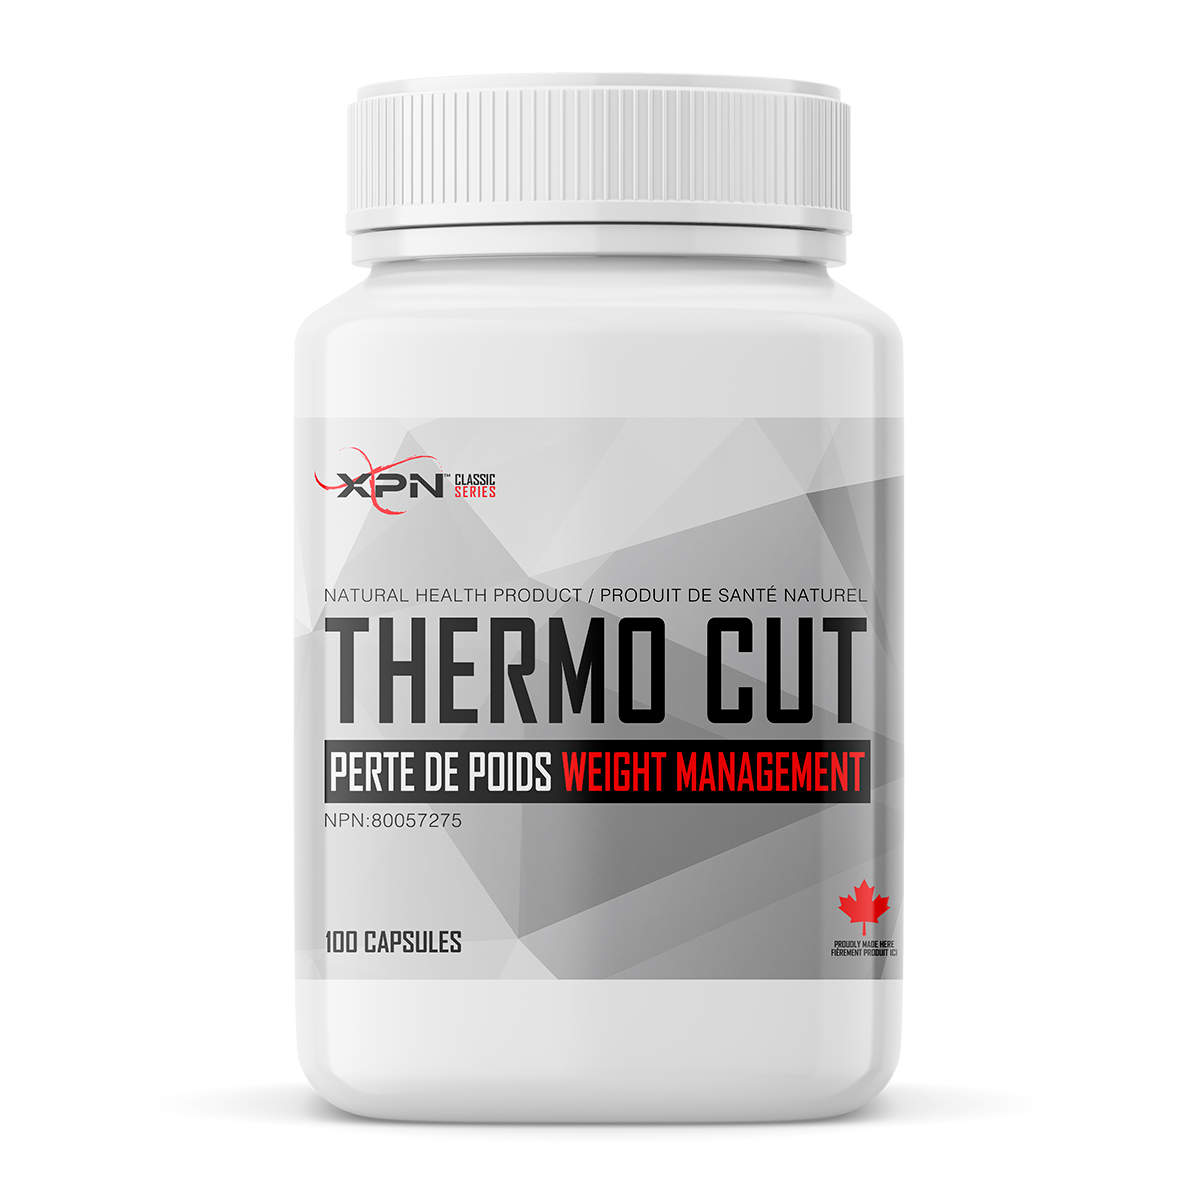 Thermo Cut